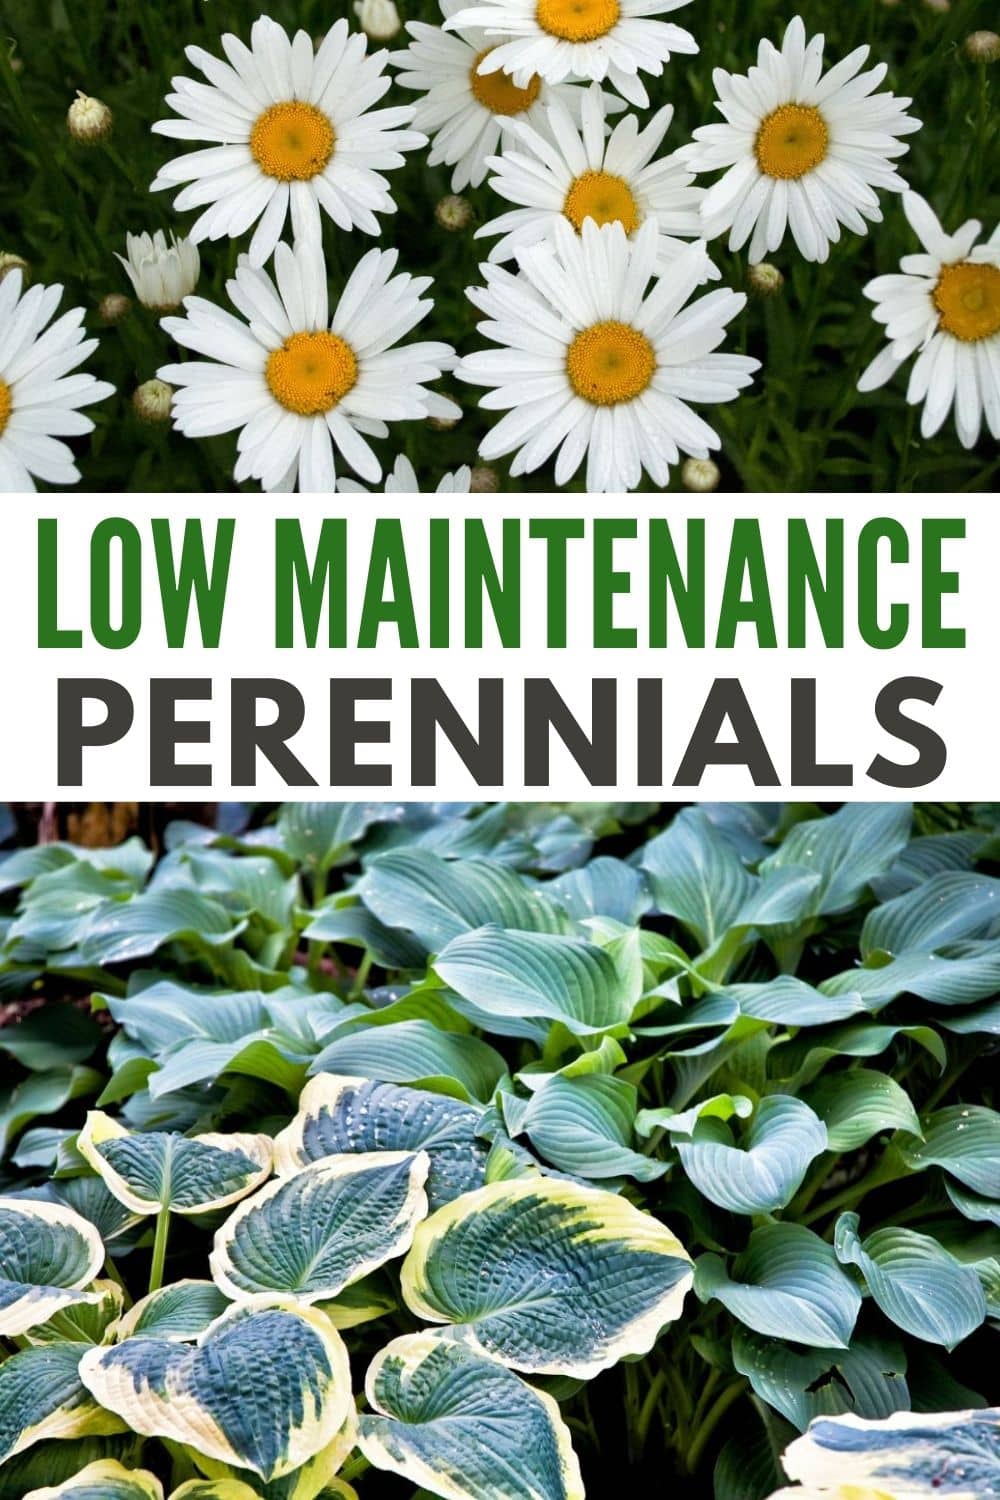 Low Maintenance Perennials are an ideal choice for gardeners to add color to their landscape without a ton of effort to maintain them. #lowmaintenanceperennials #lowmaintenance #landscaping #gardening #perennials via @wondermomwannab